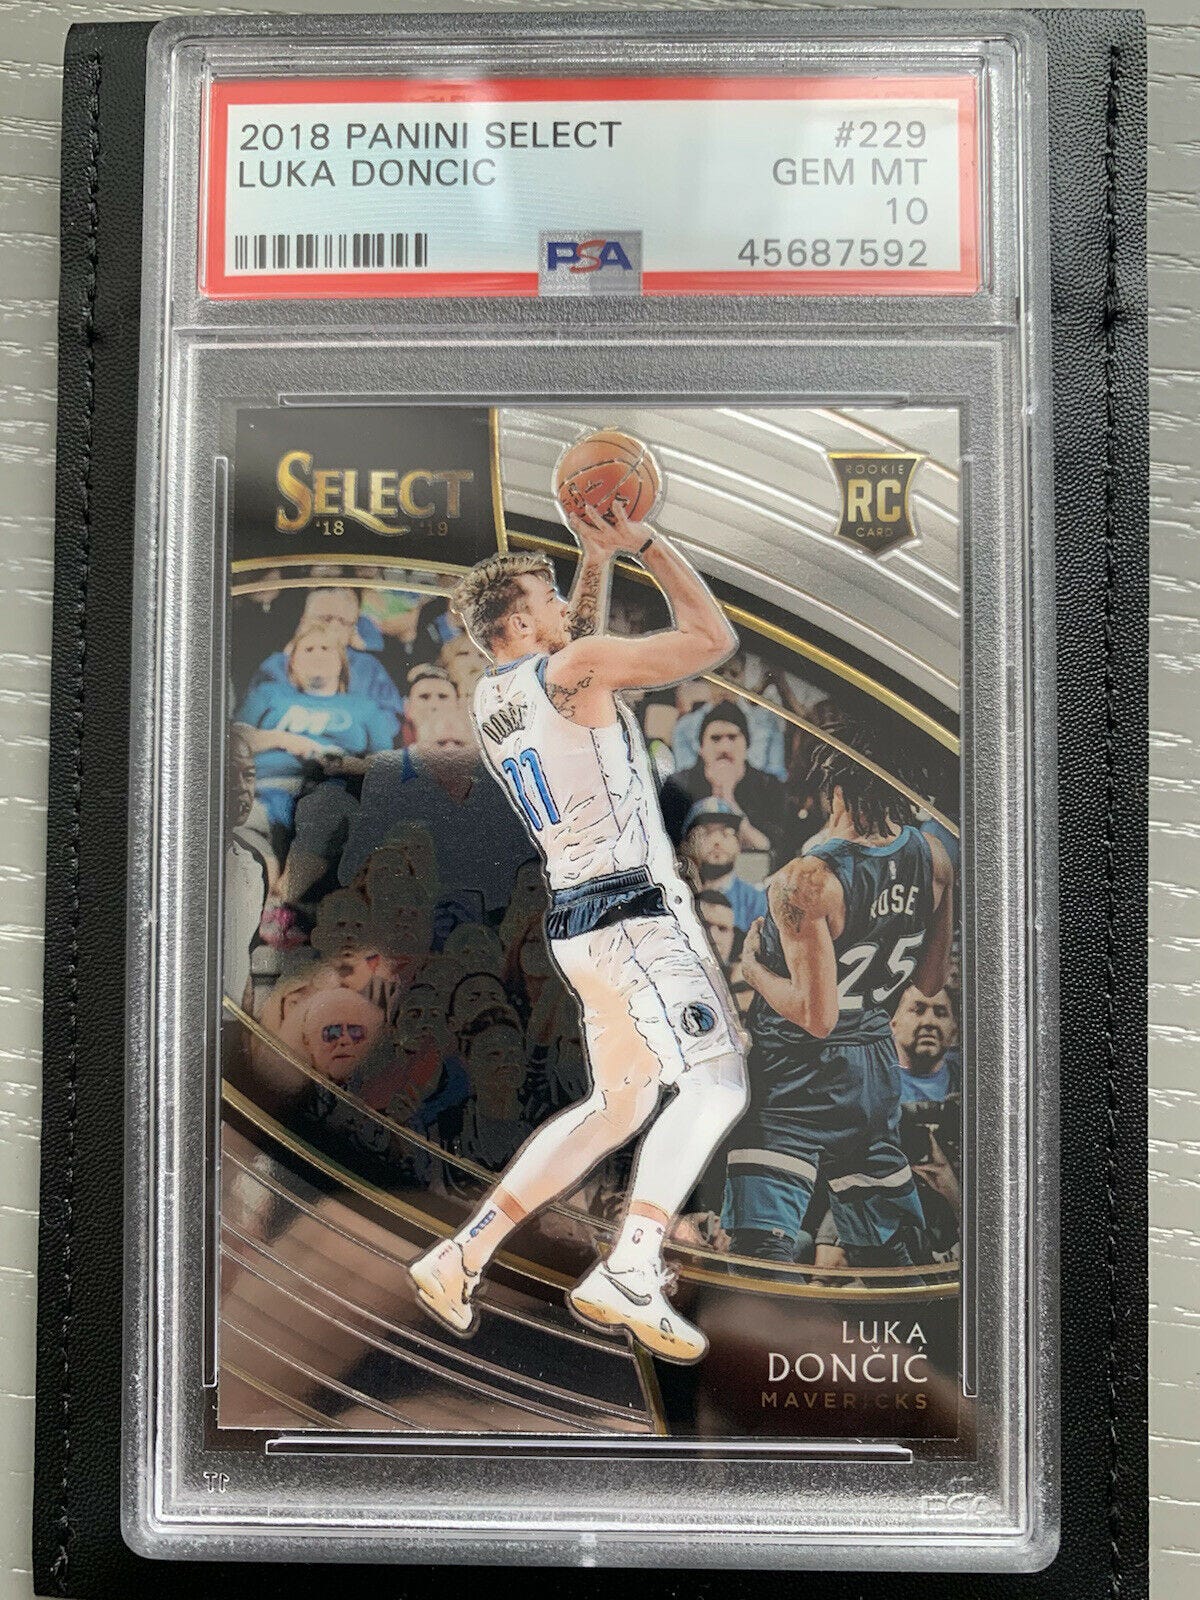 Image 1 - 2018-19 Select  #229 Luka Doncic Courtside RC PSA 10 Perfect  Gem Mint Card